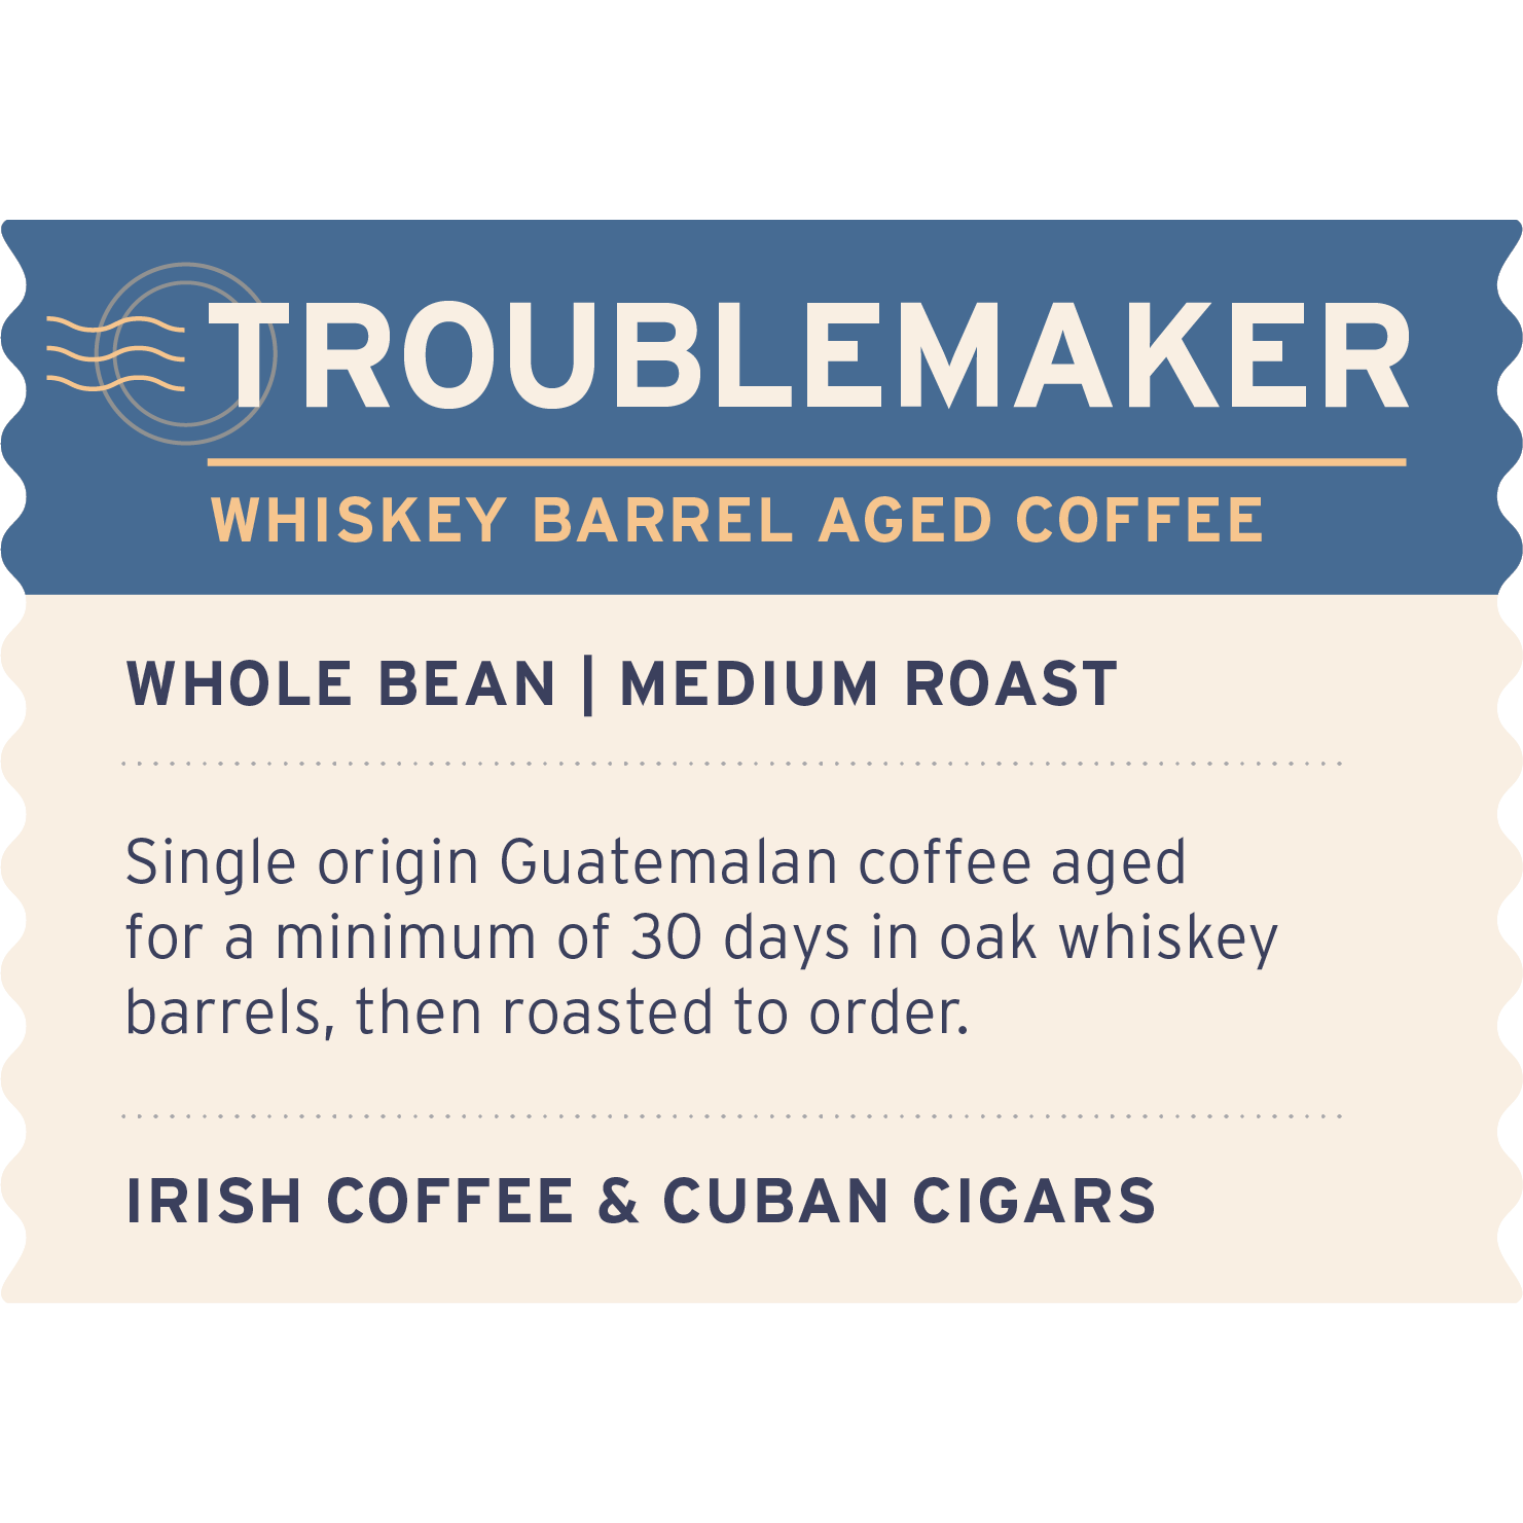 Troublemaker Whiskey Barrel Aged - Label Detail - Heyday Coffee Co.